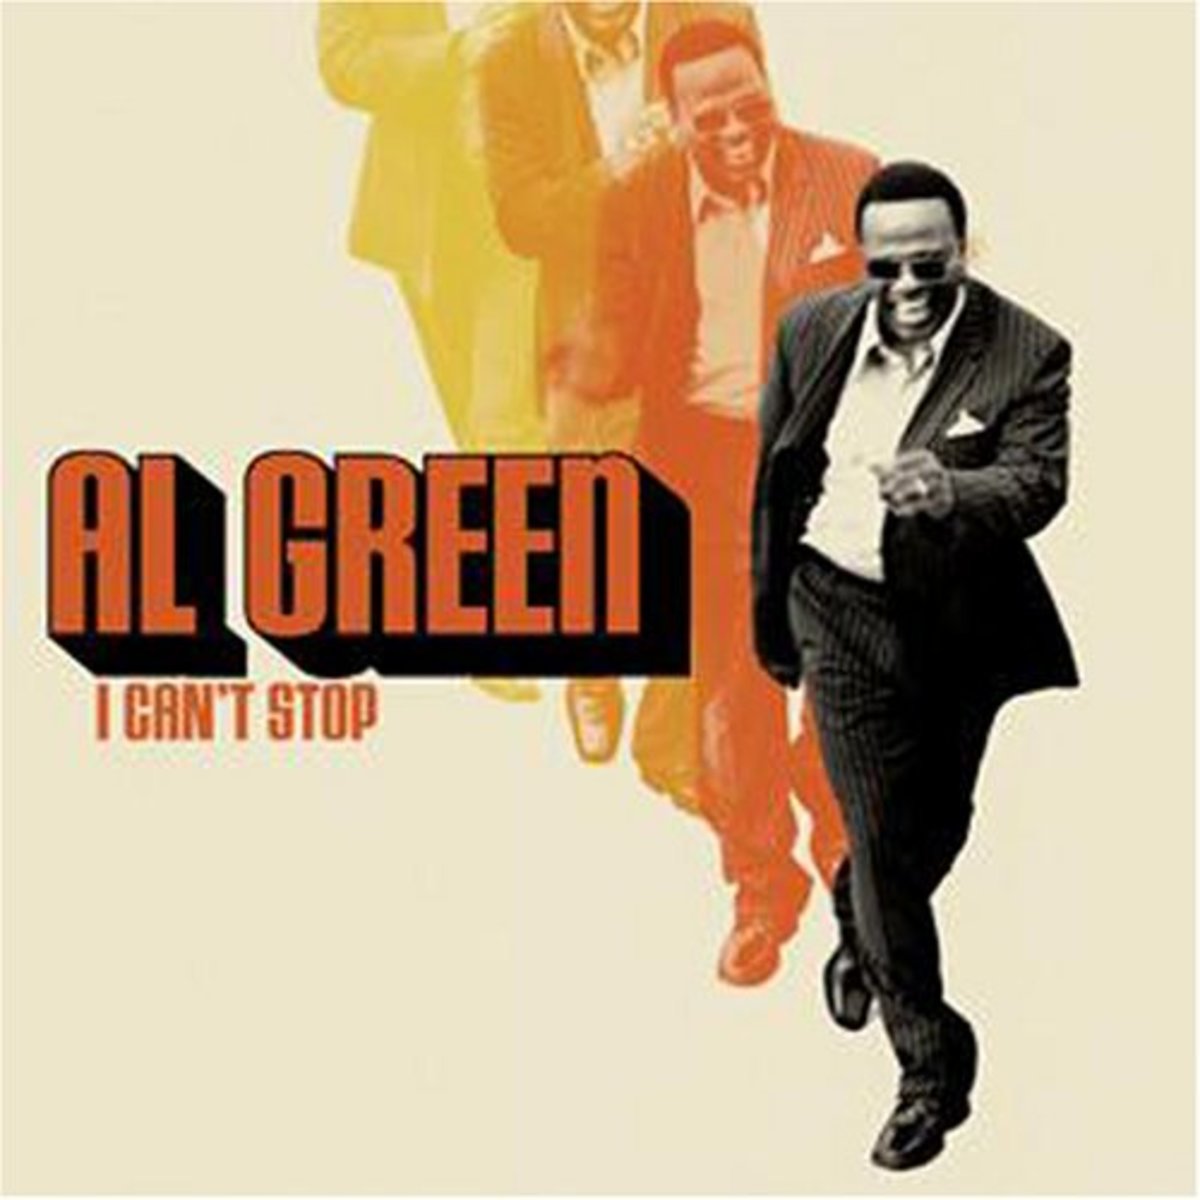 Al Green looking like The Flash.  An appropriate image, because even in his 60s (at the time of this recording), the good reverend always seemed so full of energy.